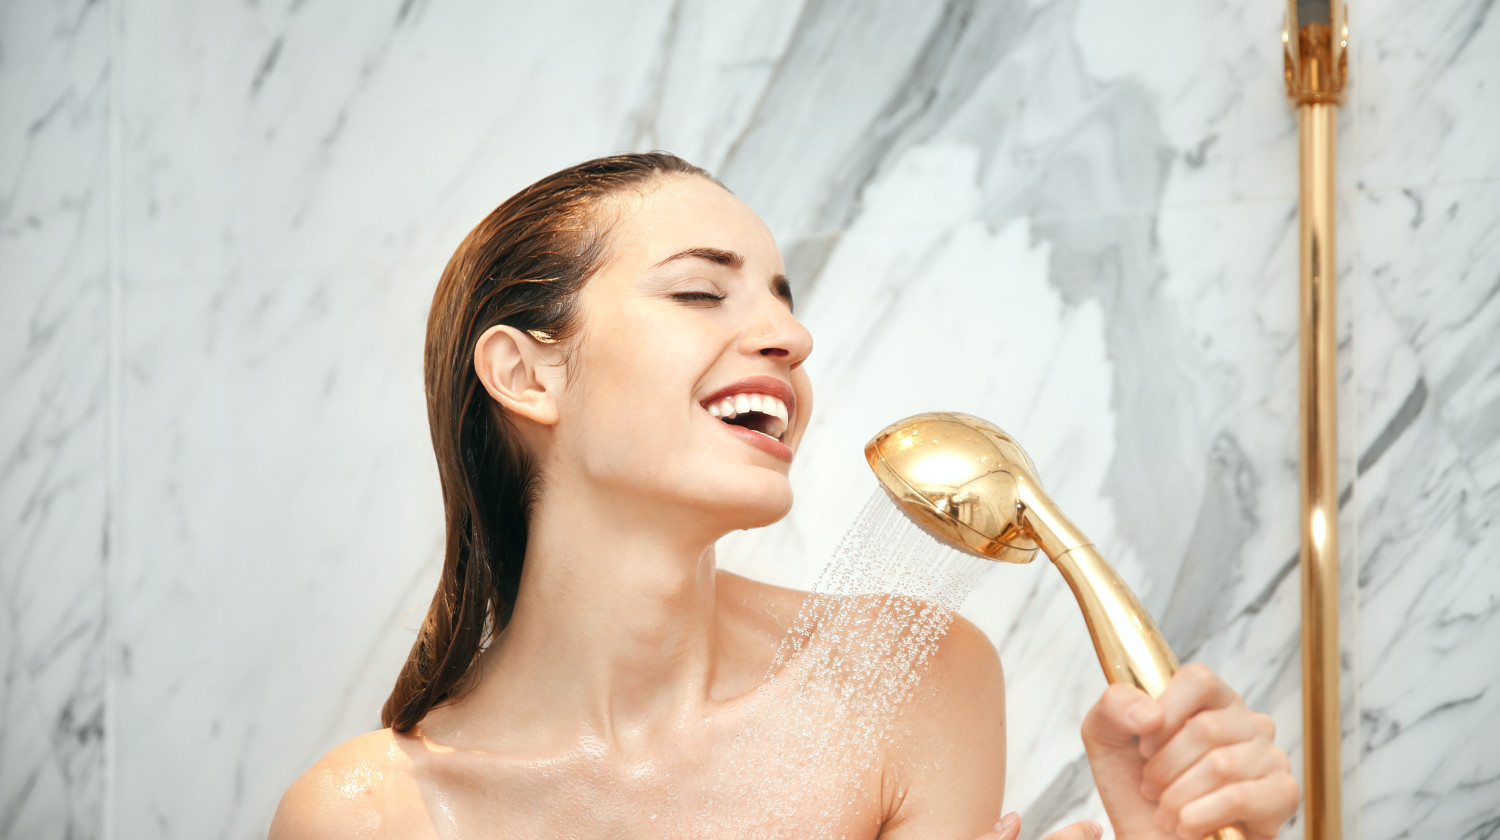 Feature | Young beautiful woman taking shower in bathroom | Bath Accessories You Need For Everyday Self-Care